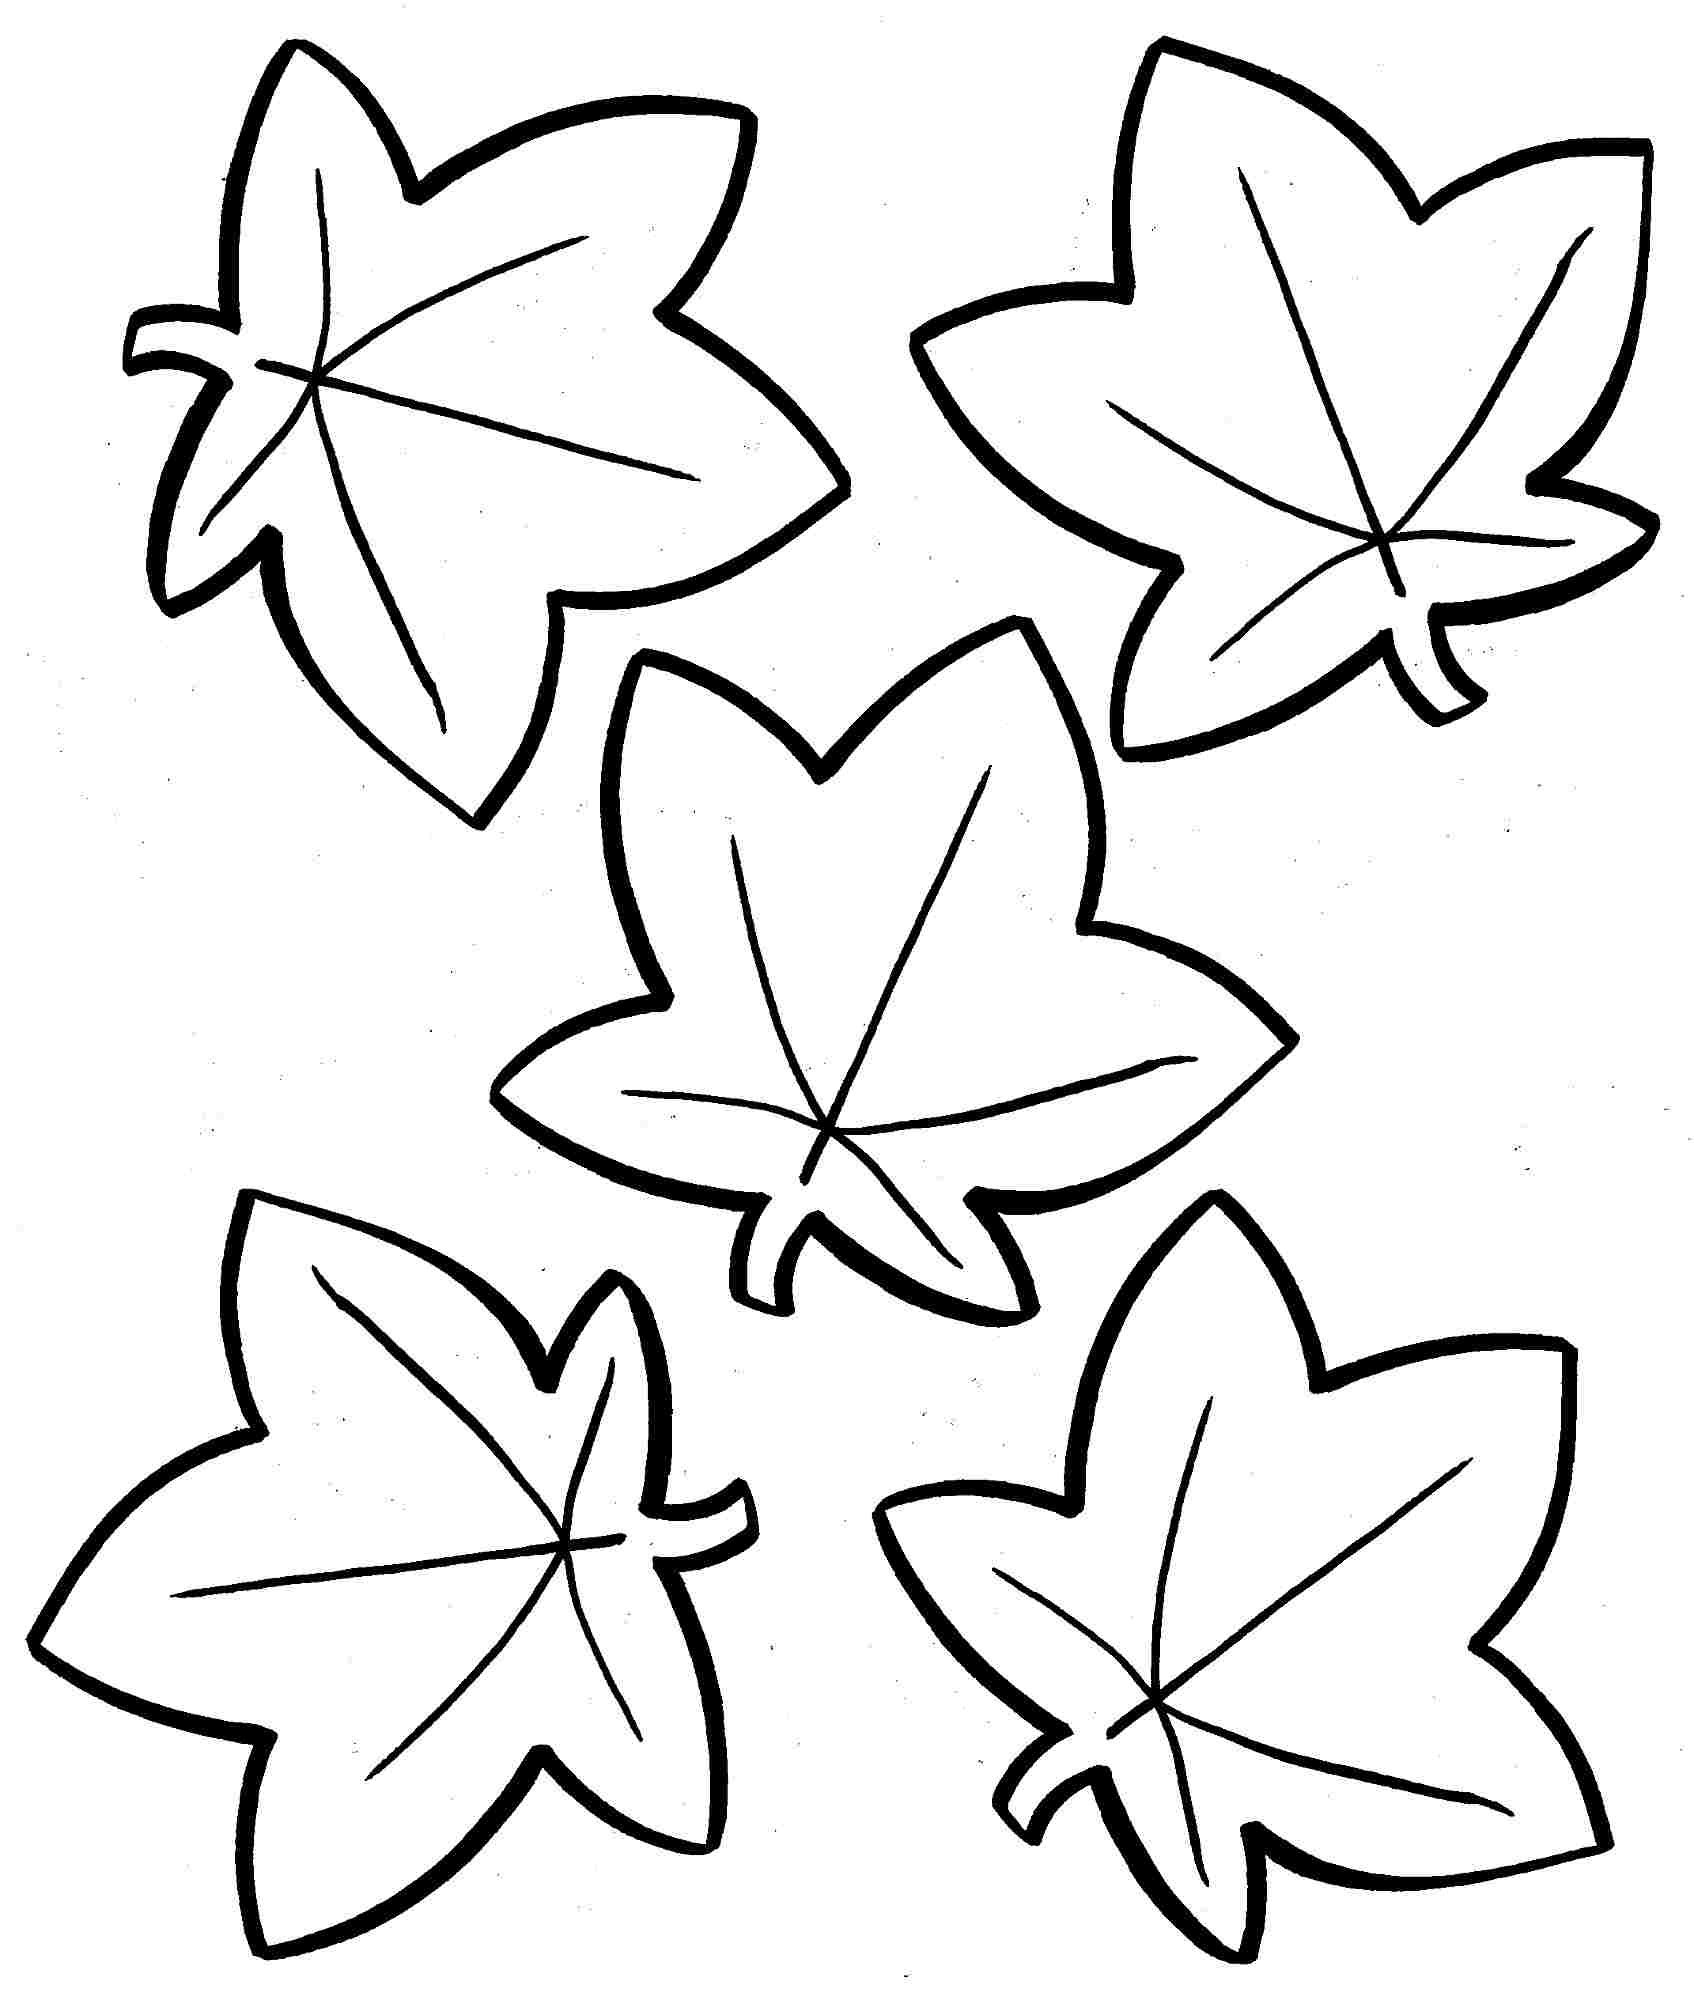 Coloring Pages: Awesome Autumn Leaves Coloring Pages Photo - Free Printable Leaf Coloring Pages